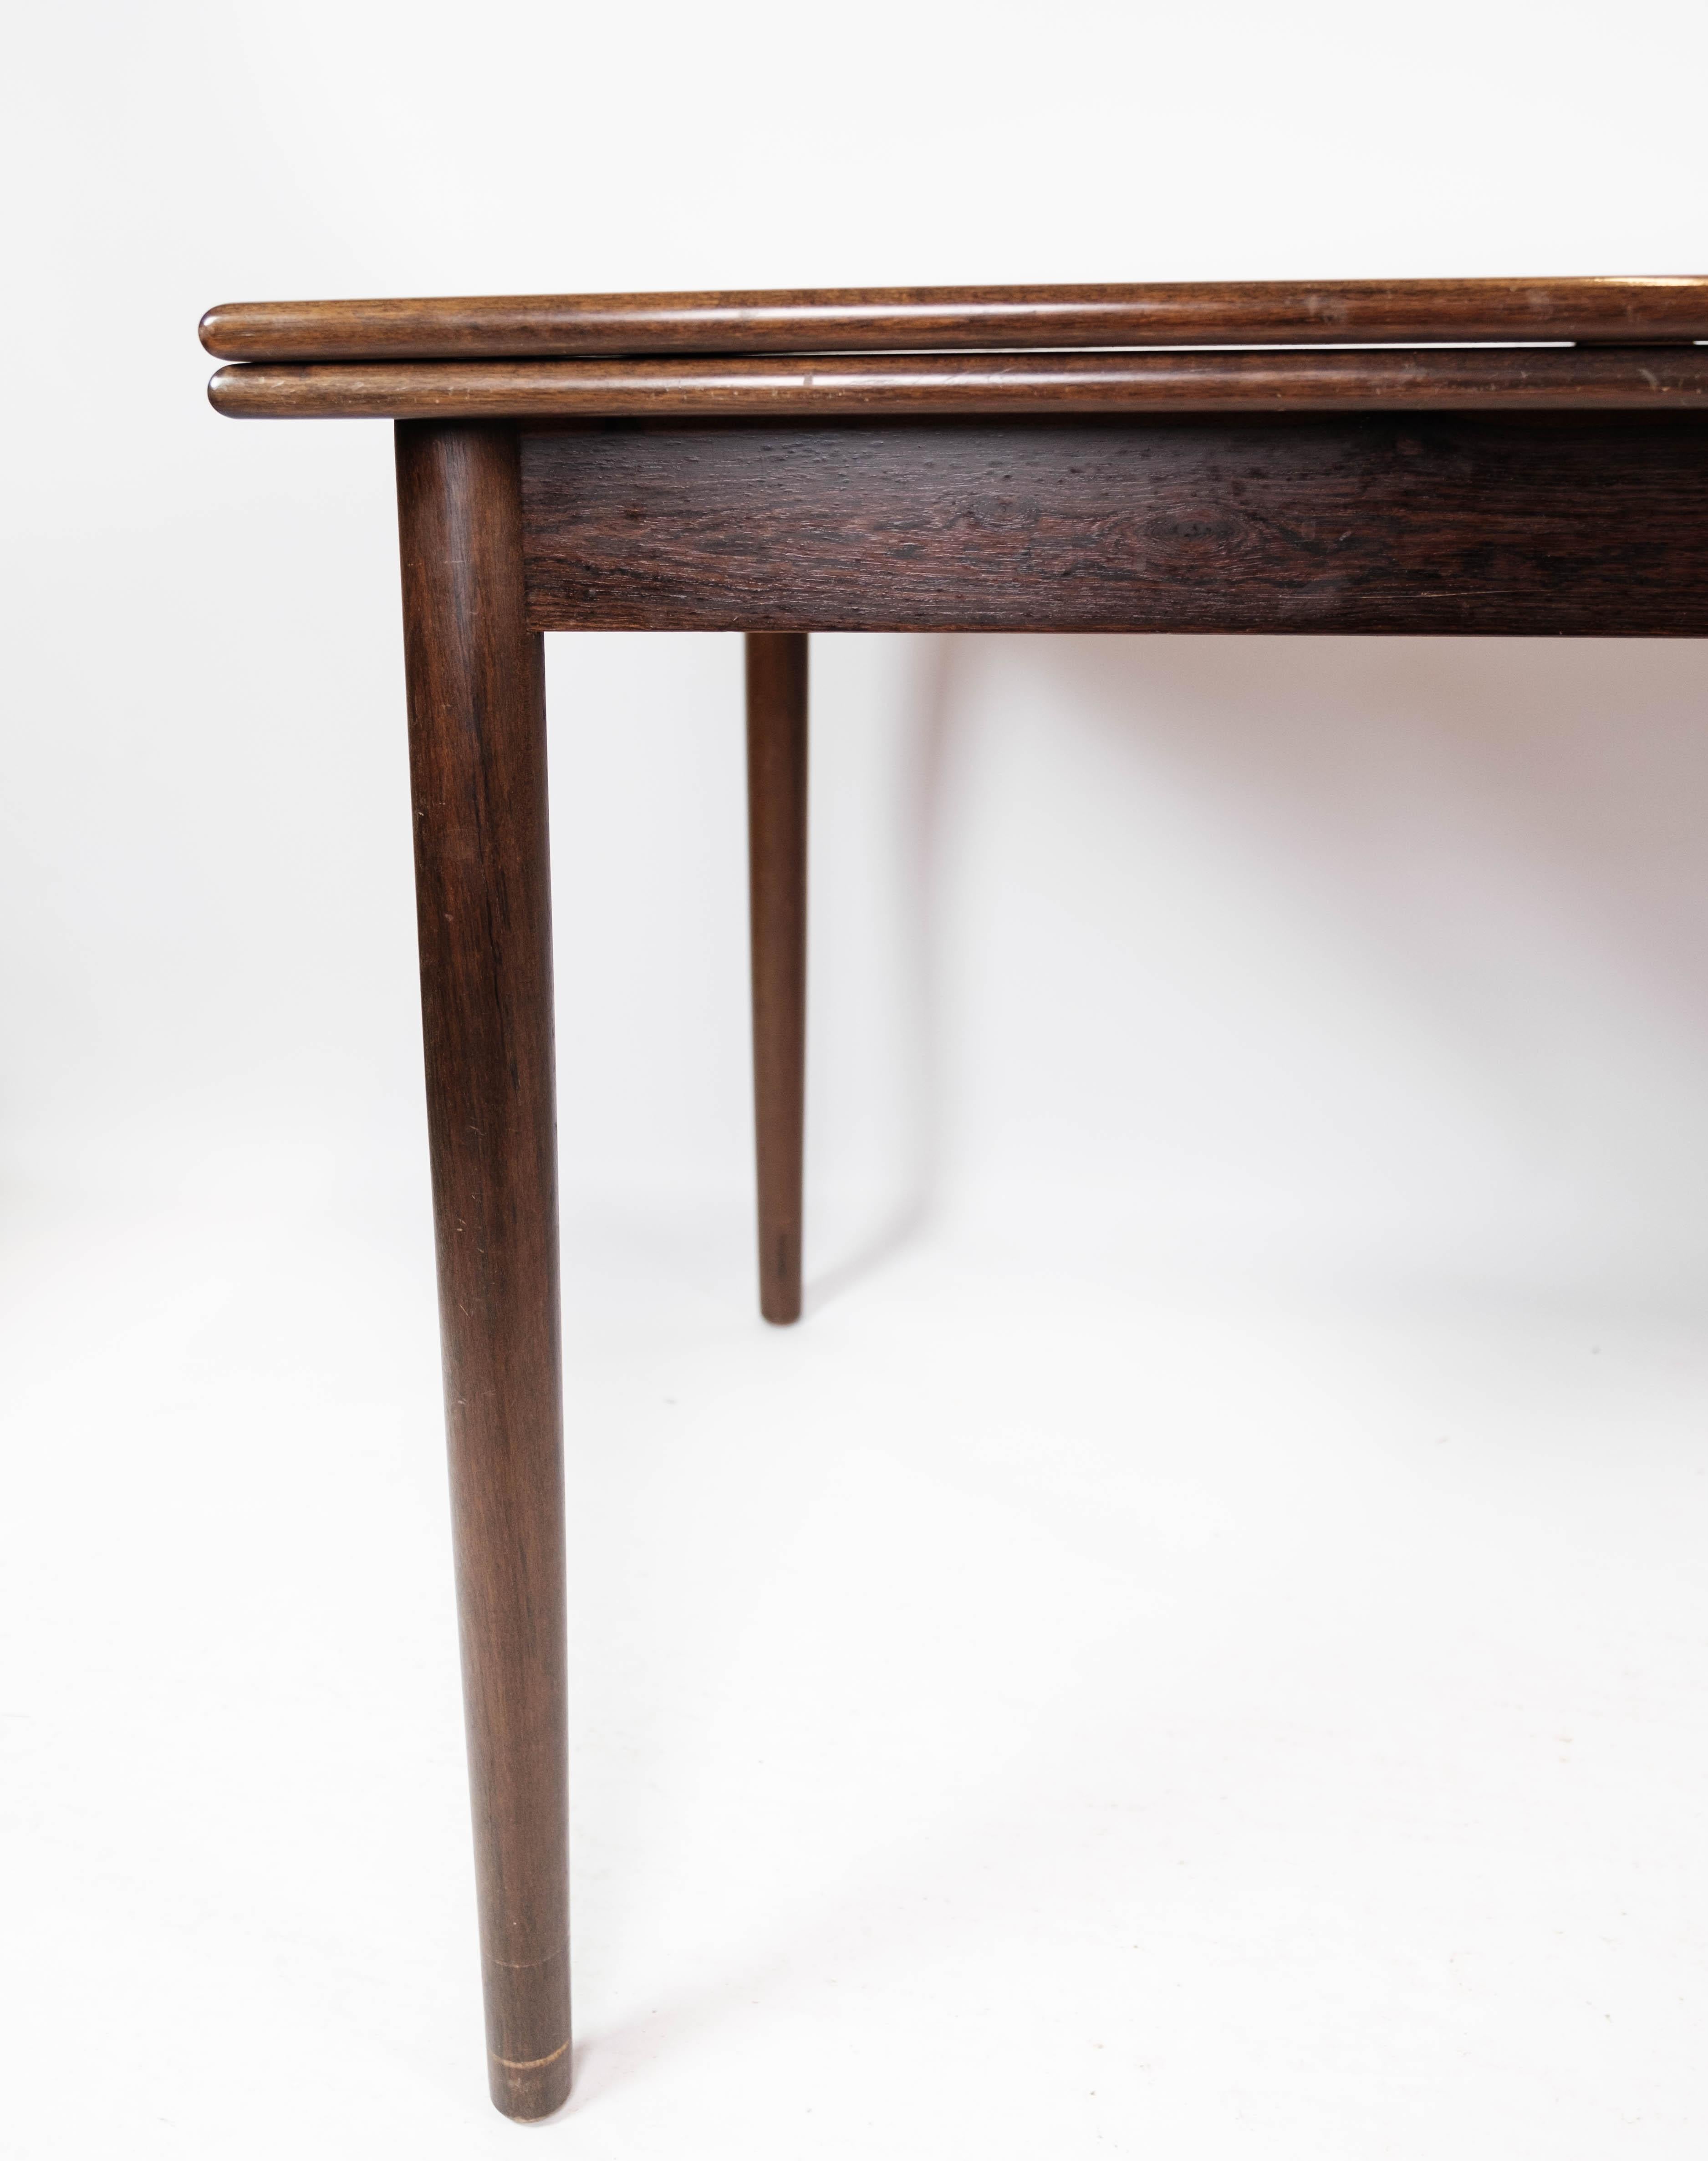 The dining table, crafted from rosewood and boasting Danish design from the 1960s, is a stunning example of mid-century modern elegance.

Constructed from rosewood, renowned for its rich hues and distinct grain patterns, this table exudes warmth and